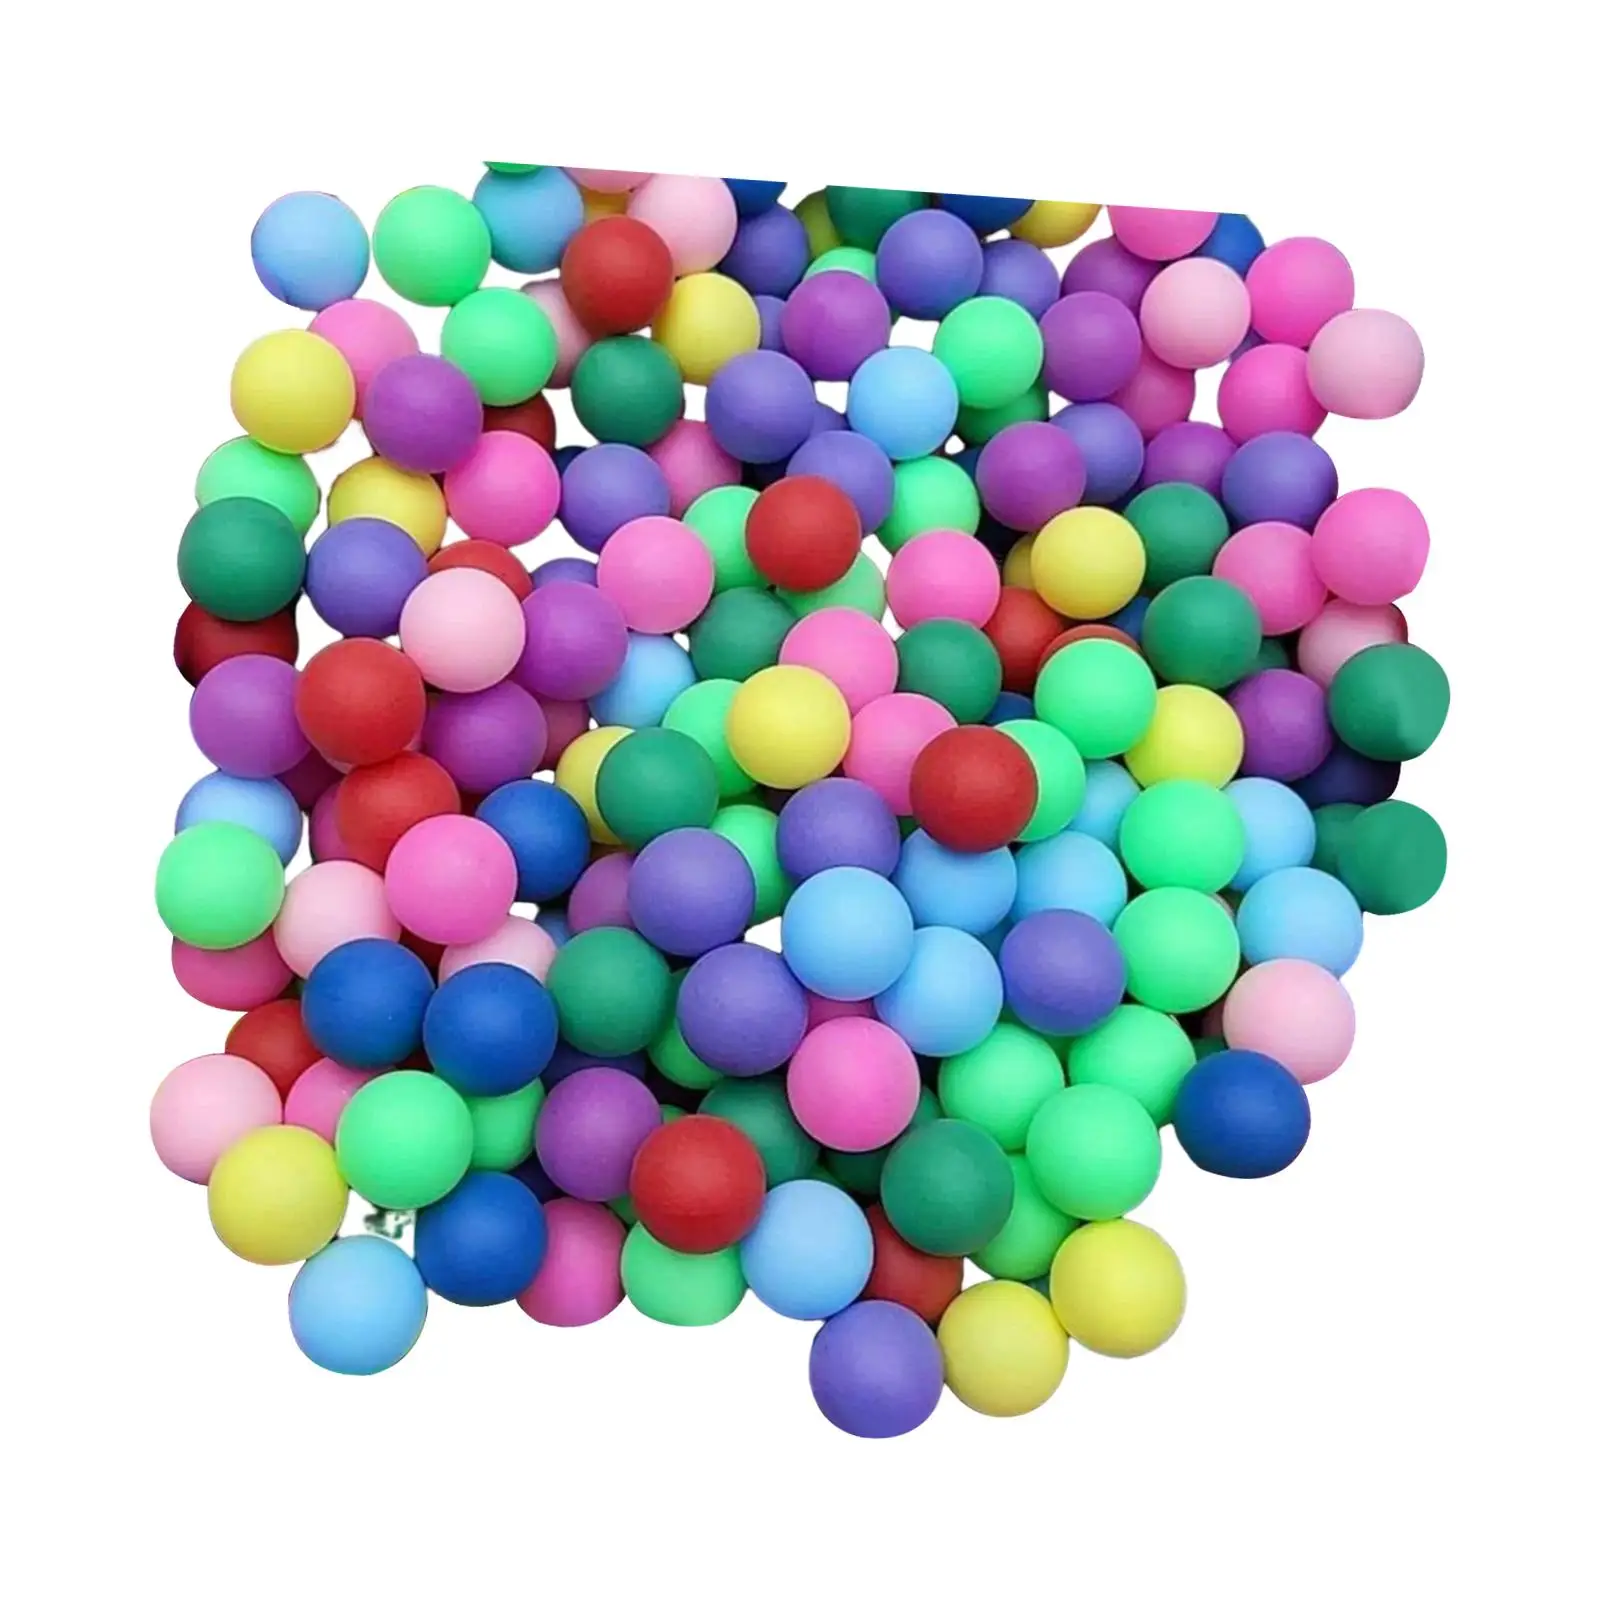 

150Pcs Ping Pong Balls 40mm Table Tennis Balls Bouncy Balls for Competitive Games Party Decor Pool Games Carnival Activities